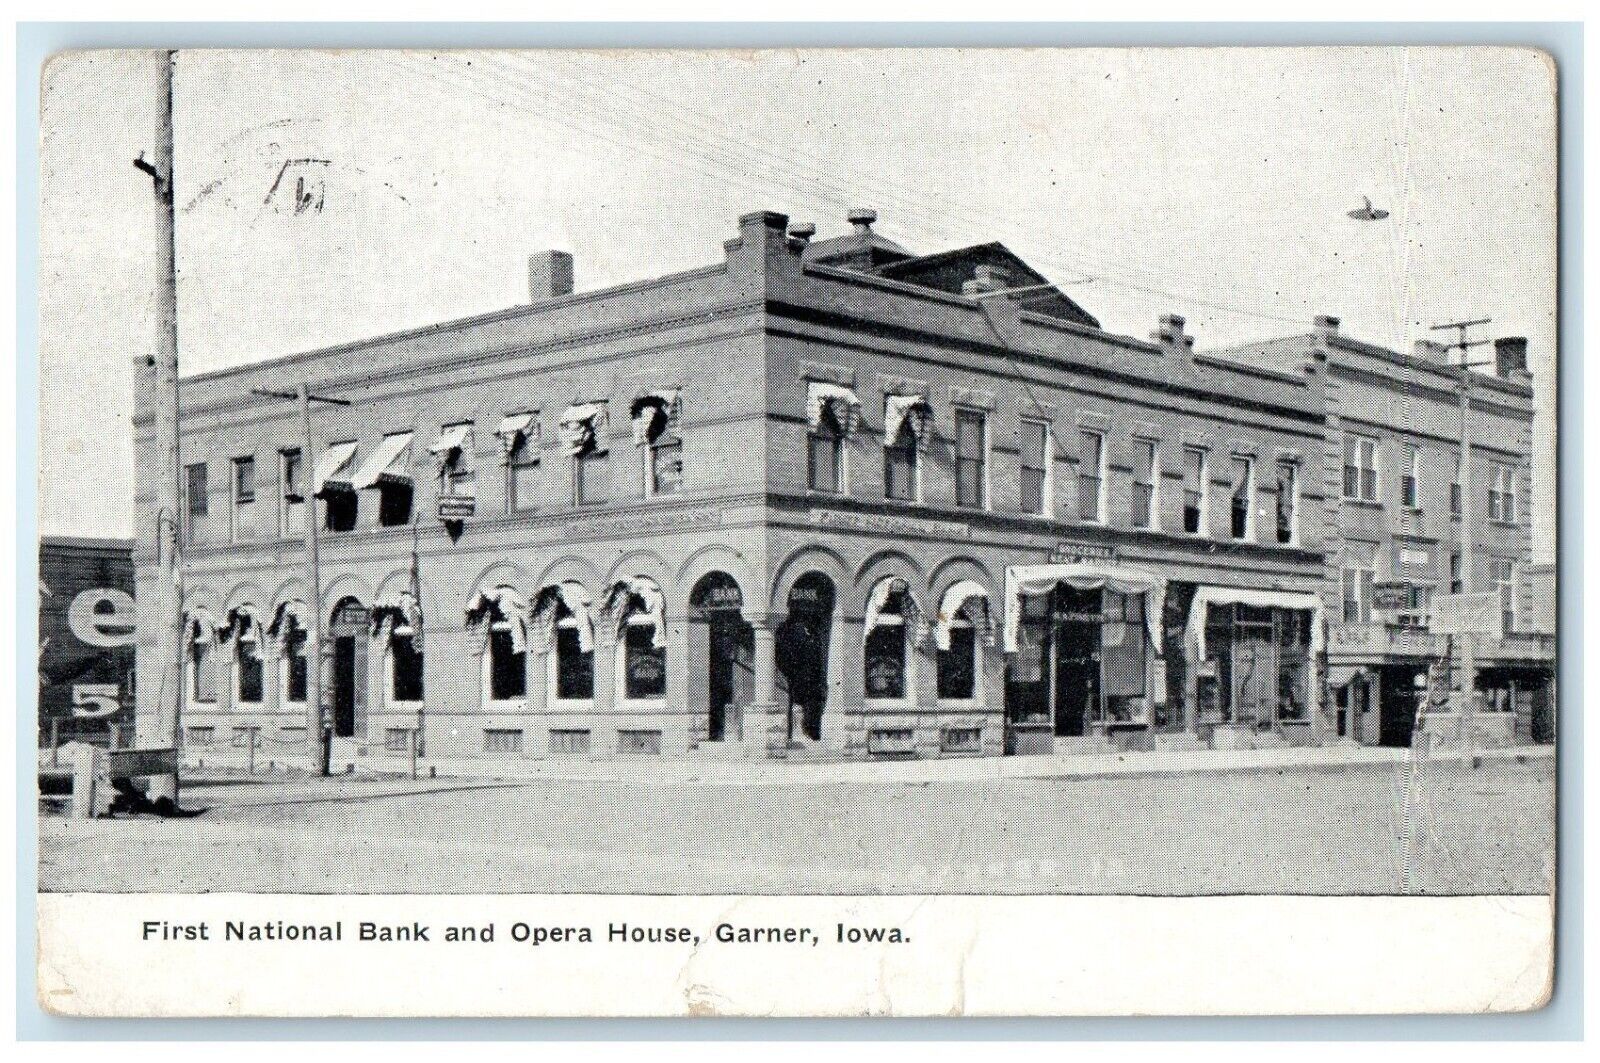 1910 First National Bank And Opera House Building Garner Iowa IA Posted Postcard